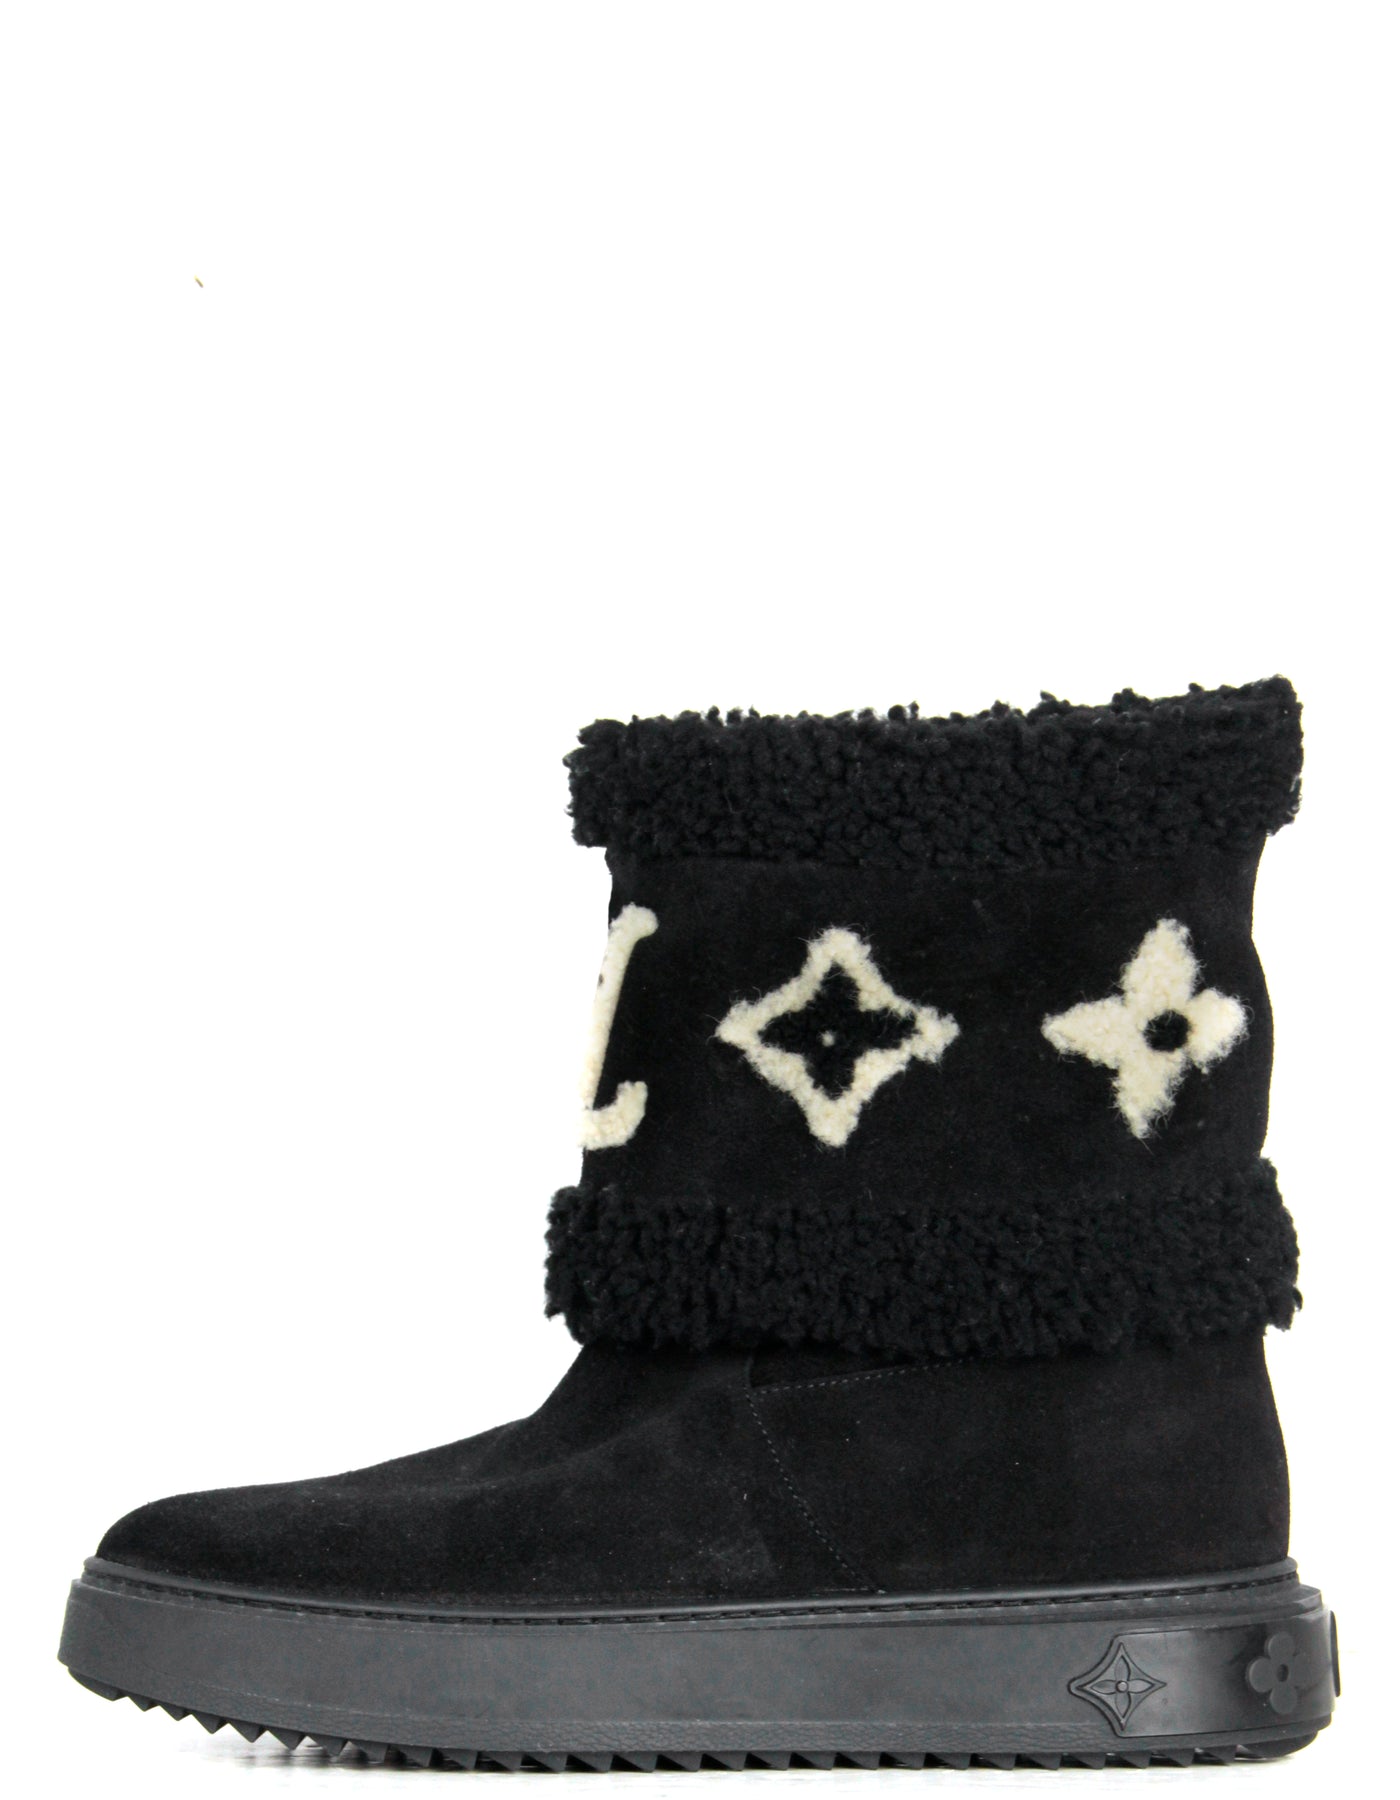 Louis Vuitton Women's Snowdrop Flat Ankle Boots Suede and Shearling Black  2353852